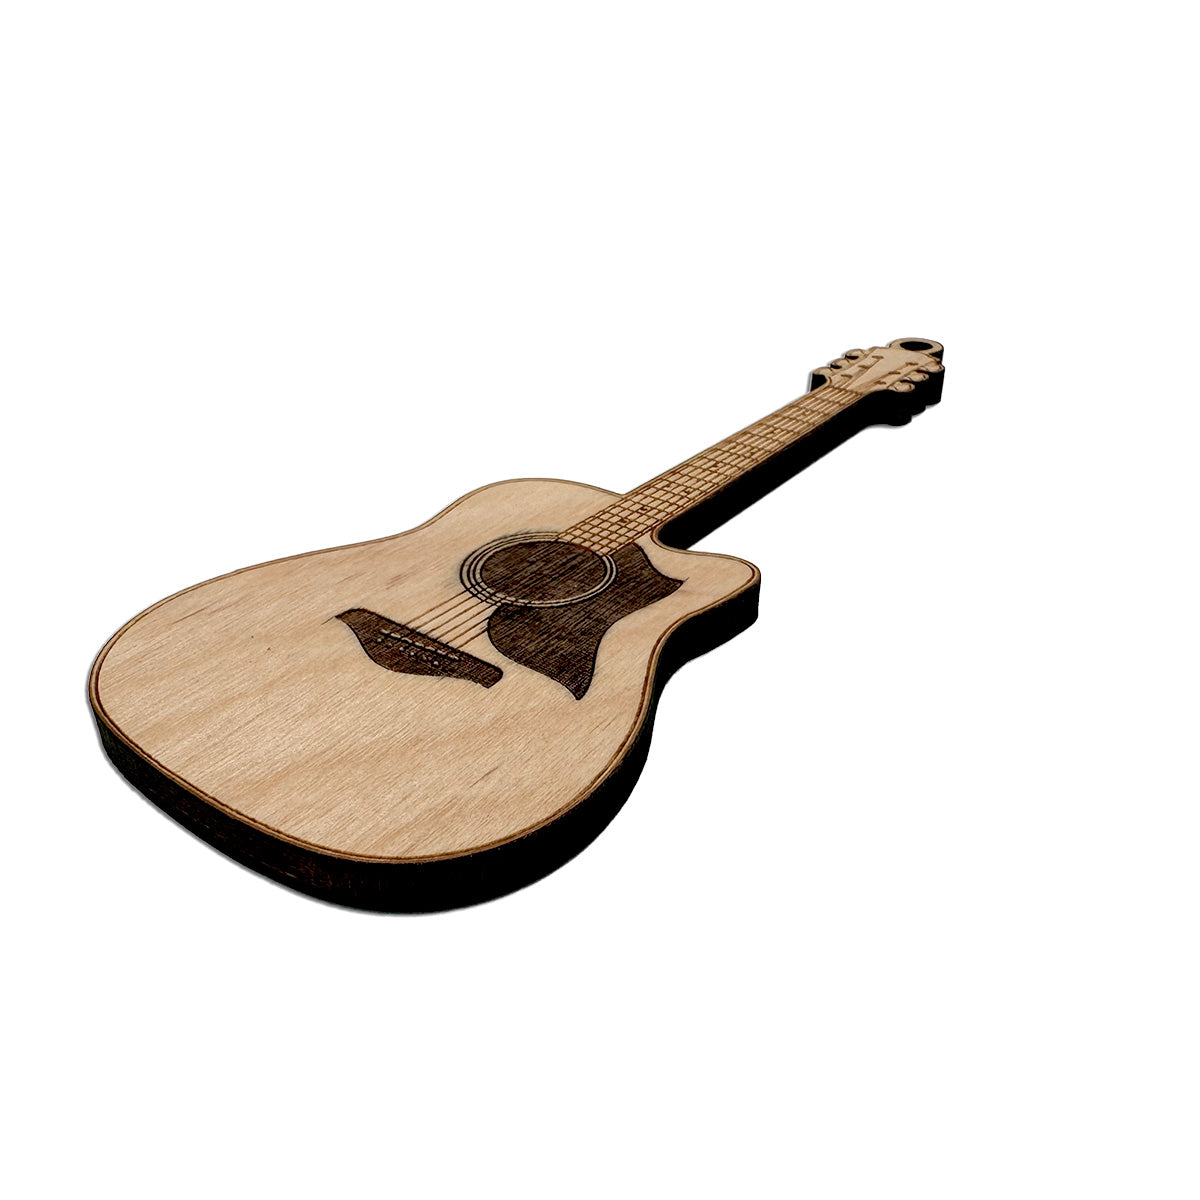 Acoustic Guitar 2 Engraved Wood Ornament